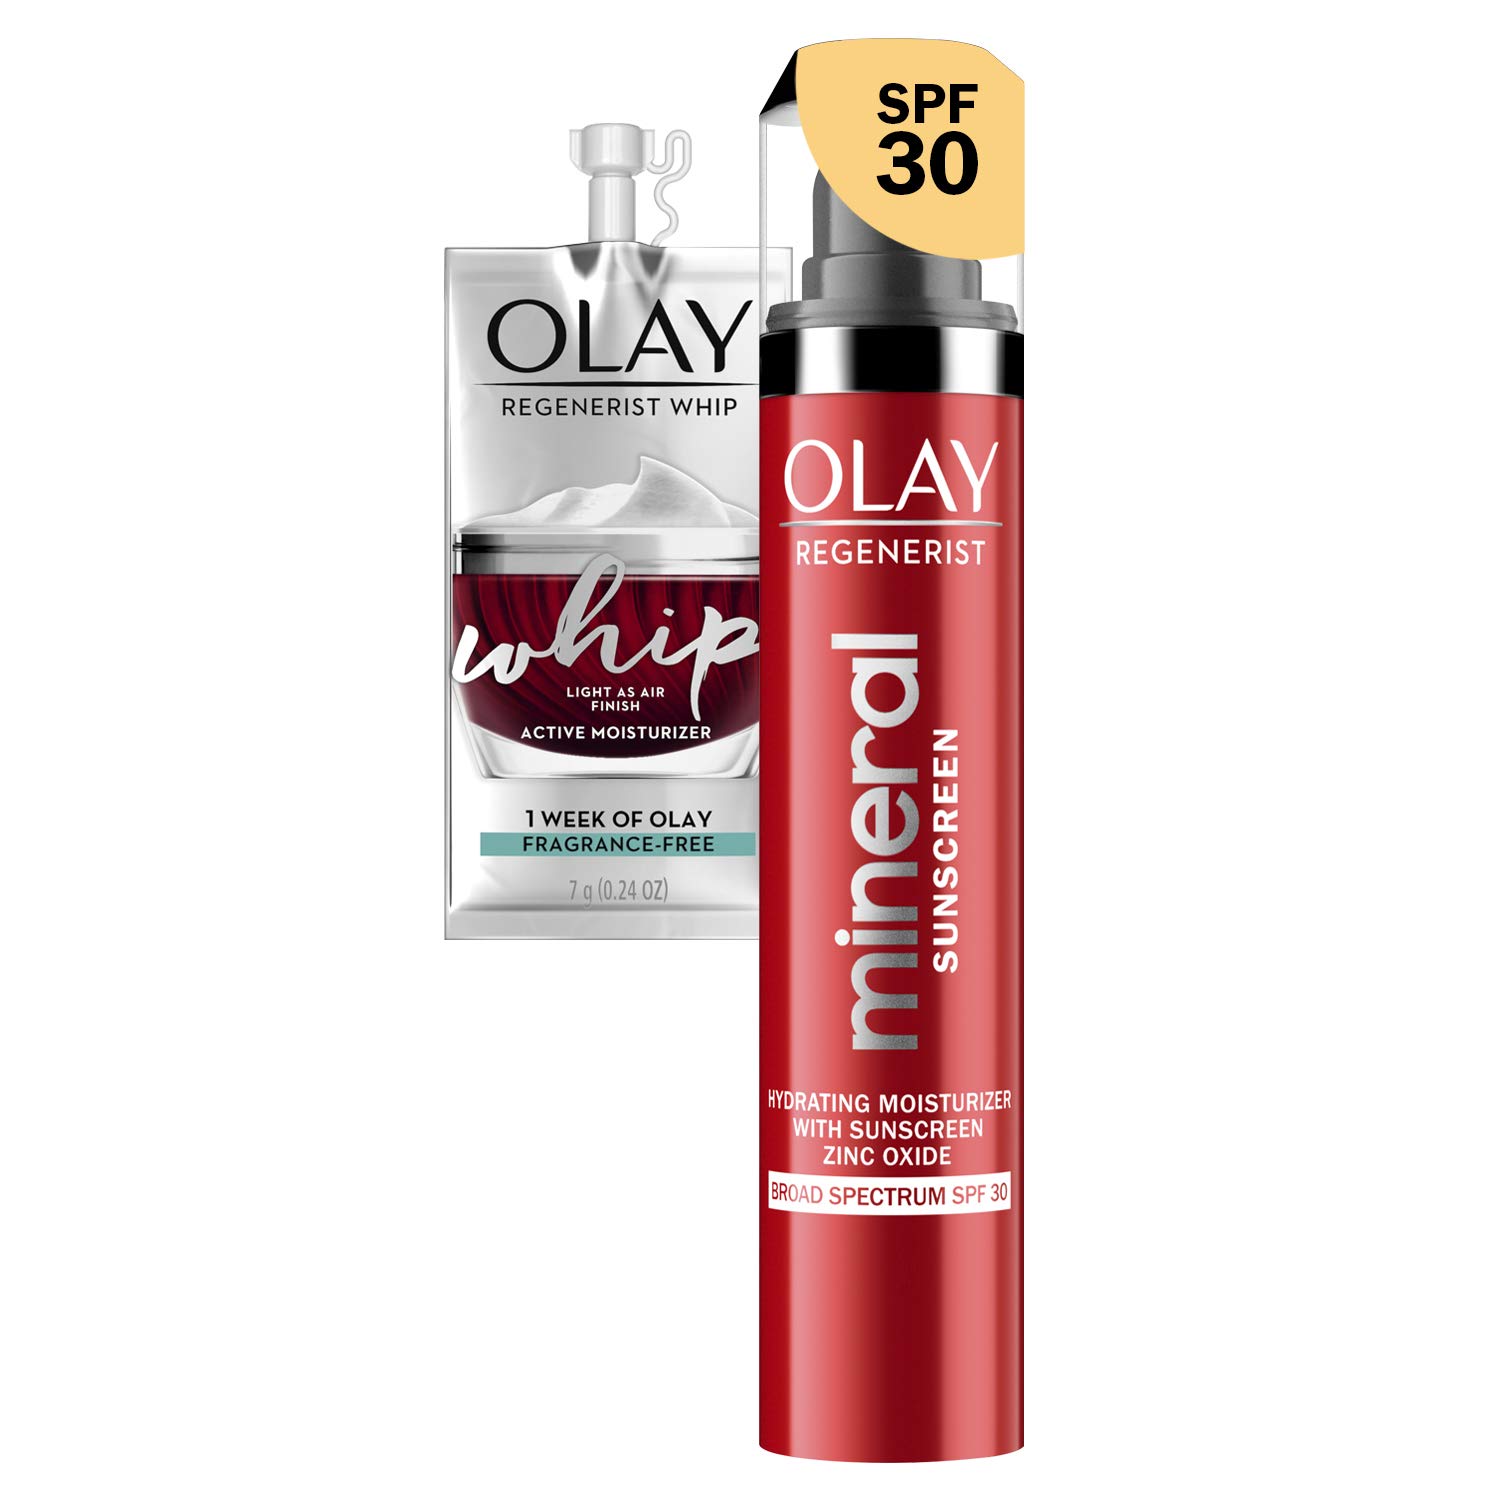 Olay Regenerist Sheer Fragrance-Free Face Lotion With SPF 30